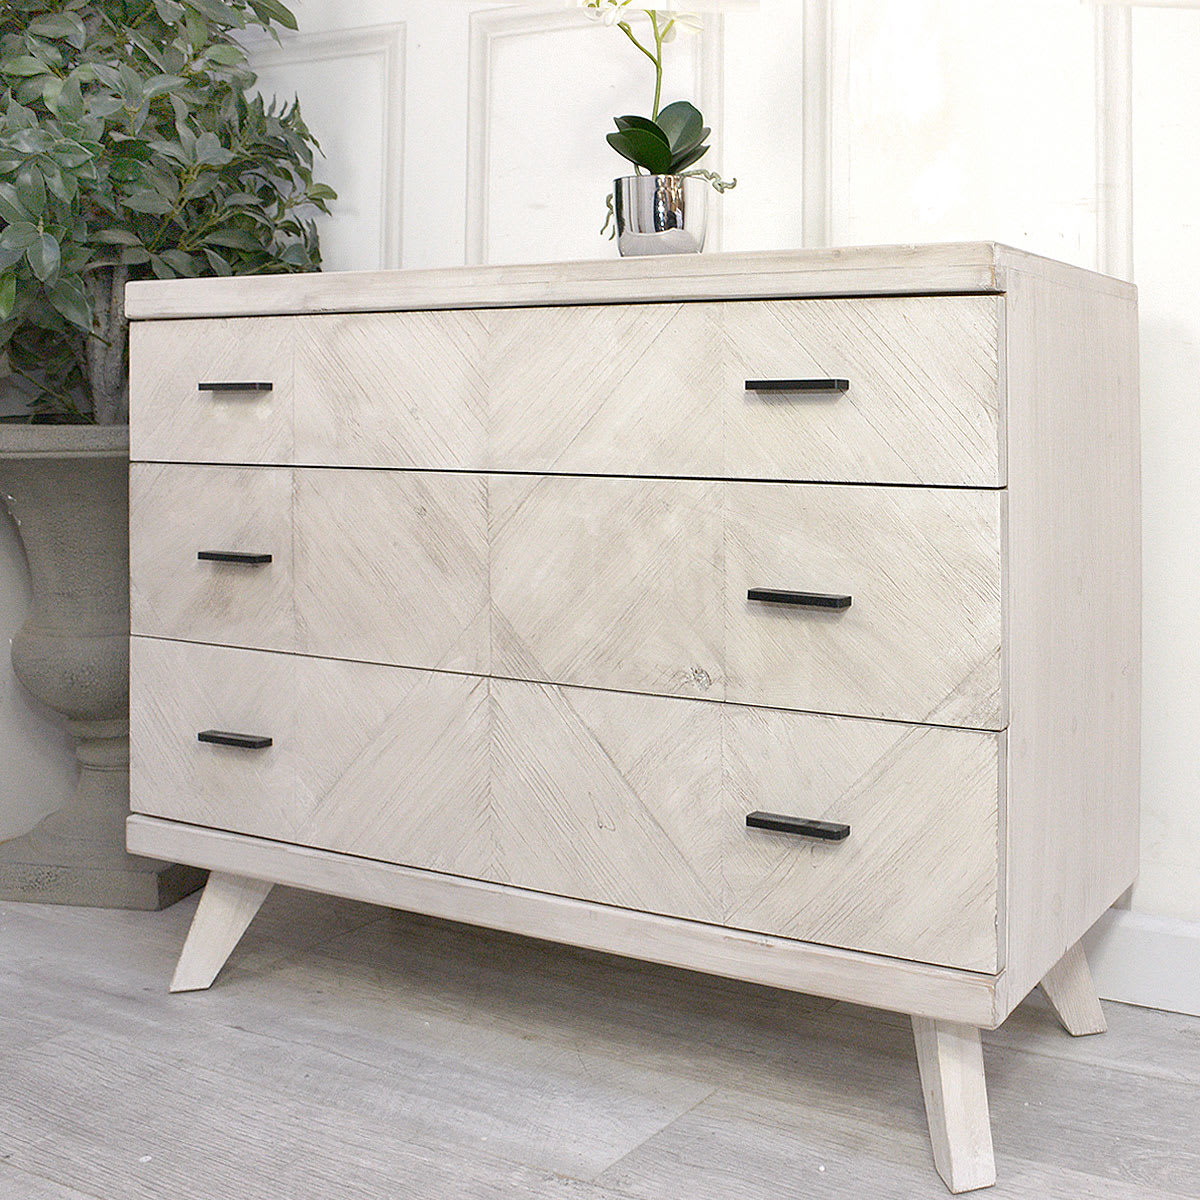 Hunston Parquet 3 Drawer Chest of Drawers